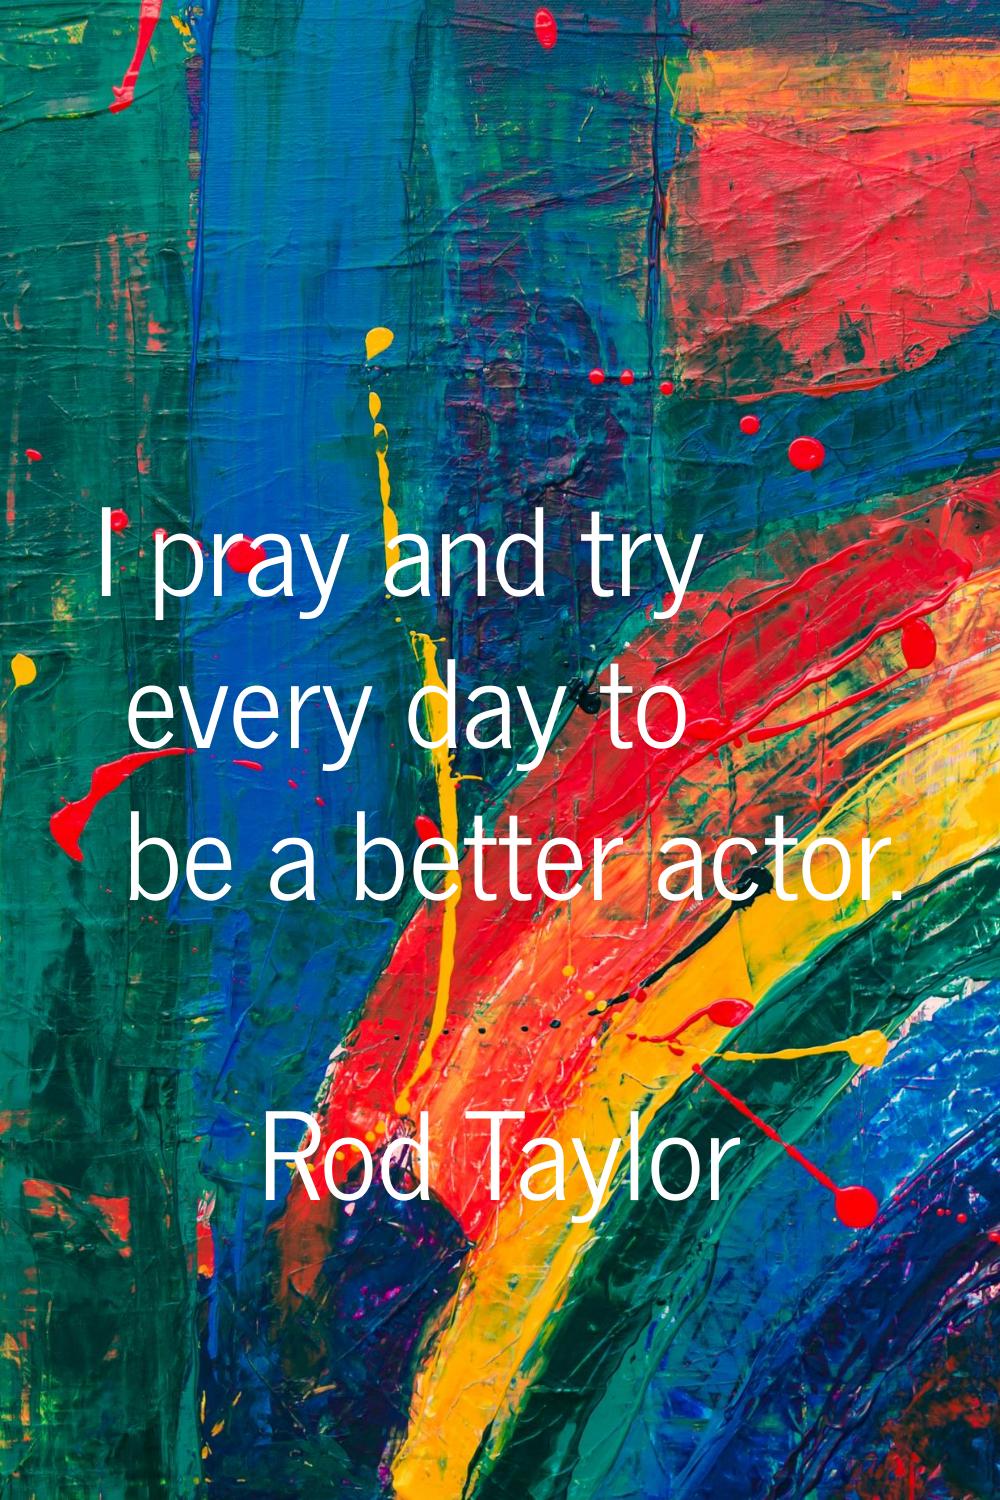 I pray and try every day to be a better actor.